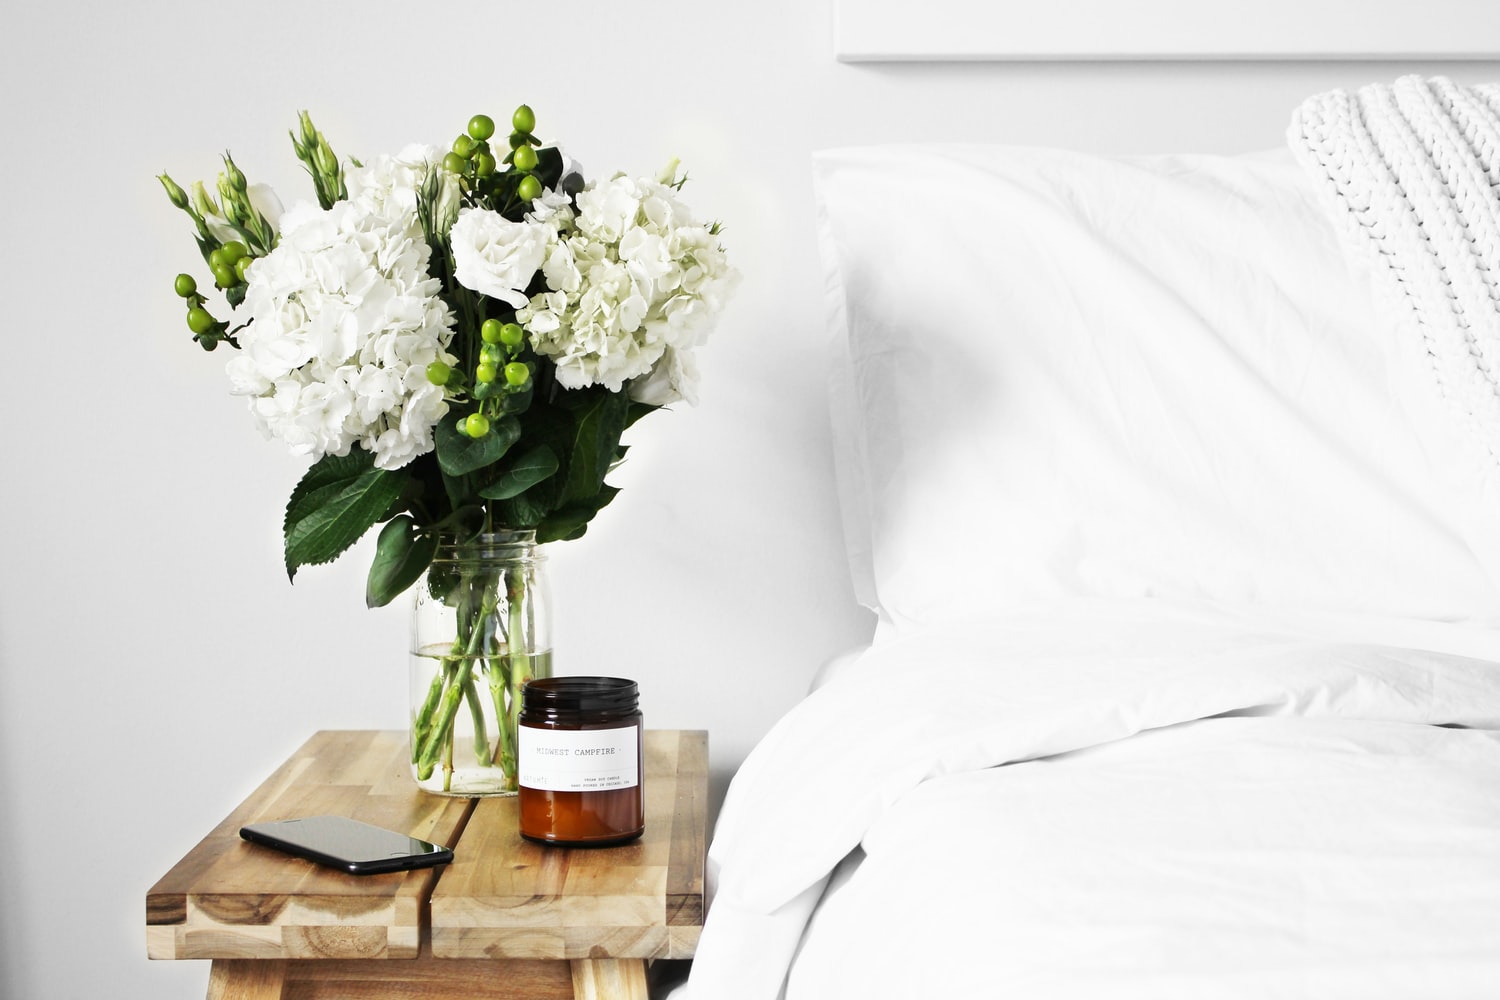 image of bed with white bedding with wooden nightstand with white flowers charging iphone and a brown glass candleholder